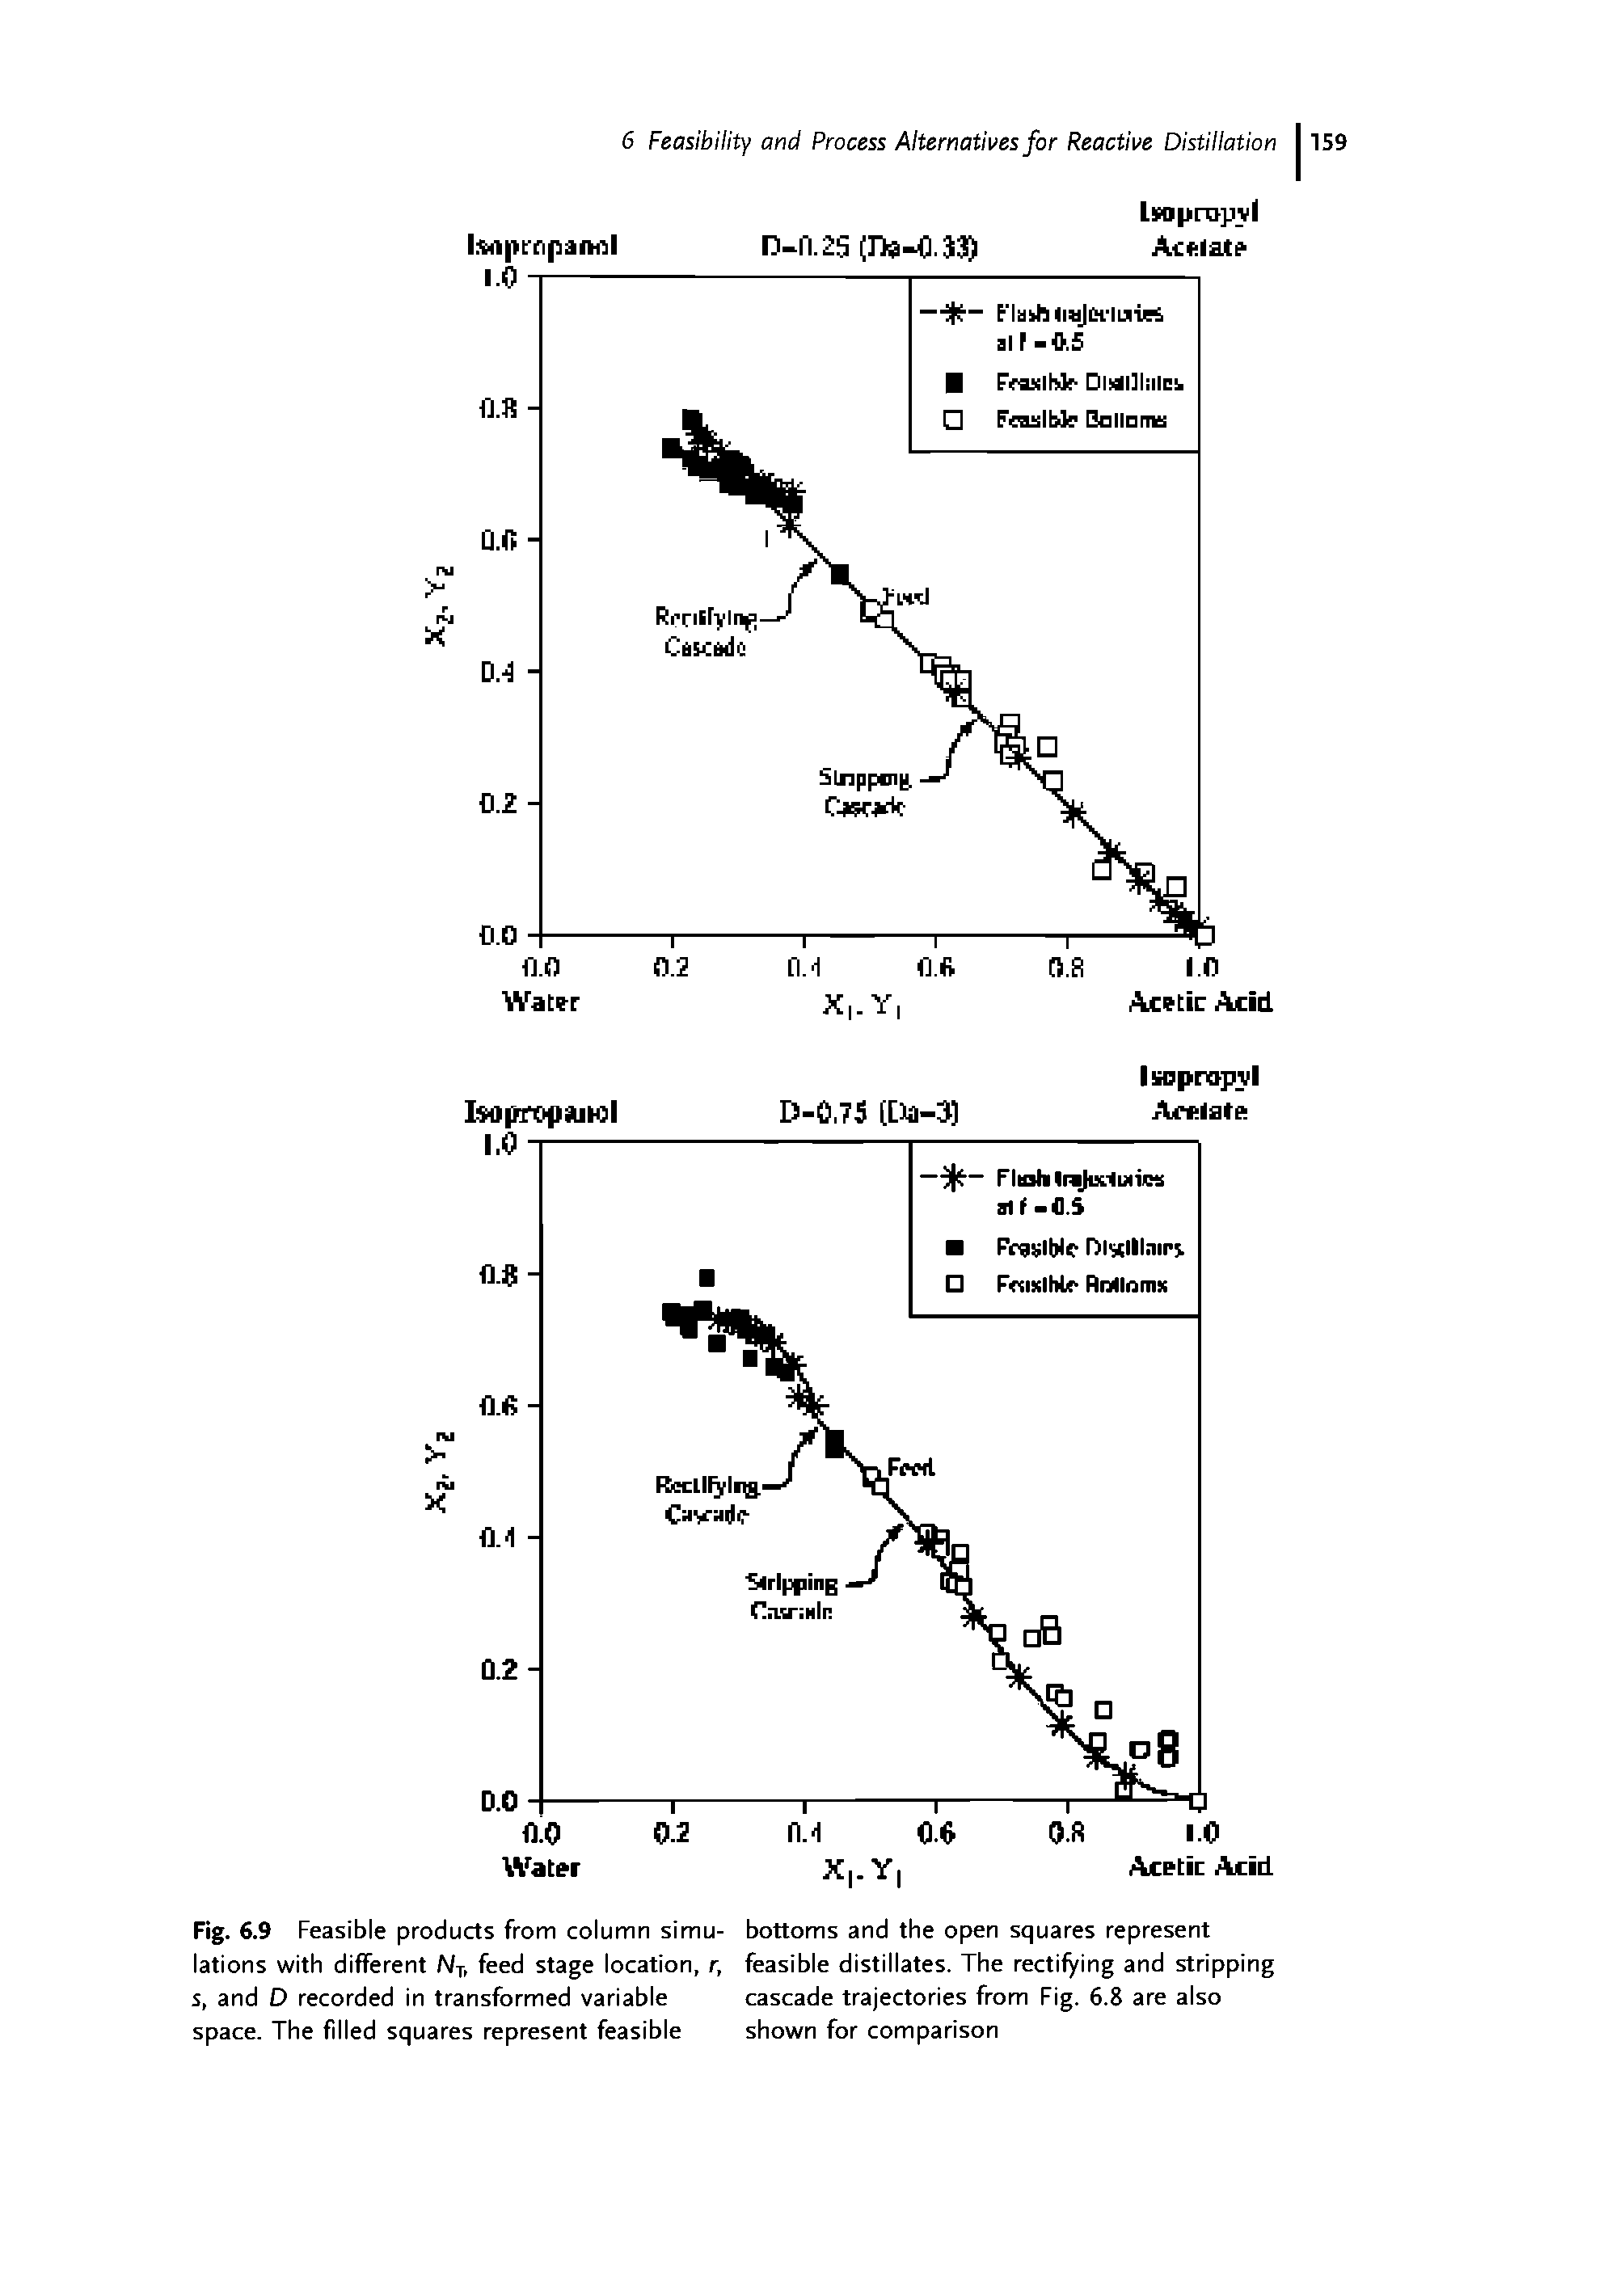 Fig. 6.9 Feasible products from column simu- bottoms and the open squares represent lations with different Nj, feed stage location, r, feasible distillates. The rectifying and stripping s, and D recorded in transformed variable cascade trajectories from Fig. 6.8 are also space. The filled squares represent feasible shown for comparison...